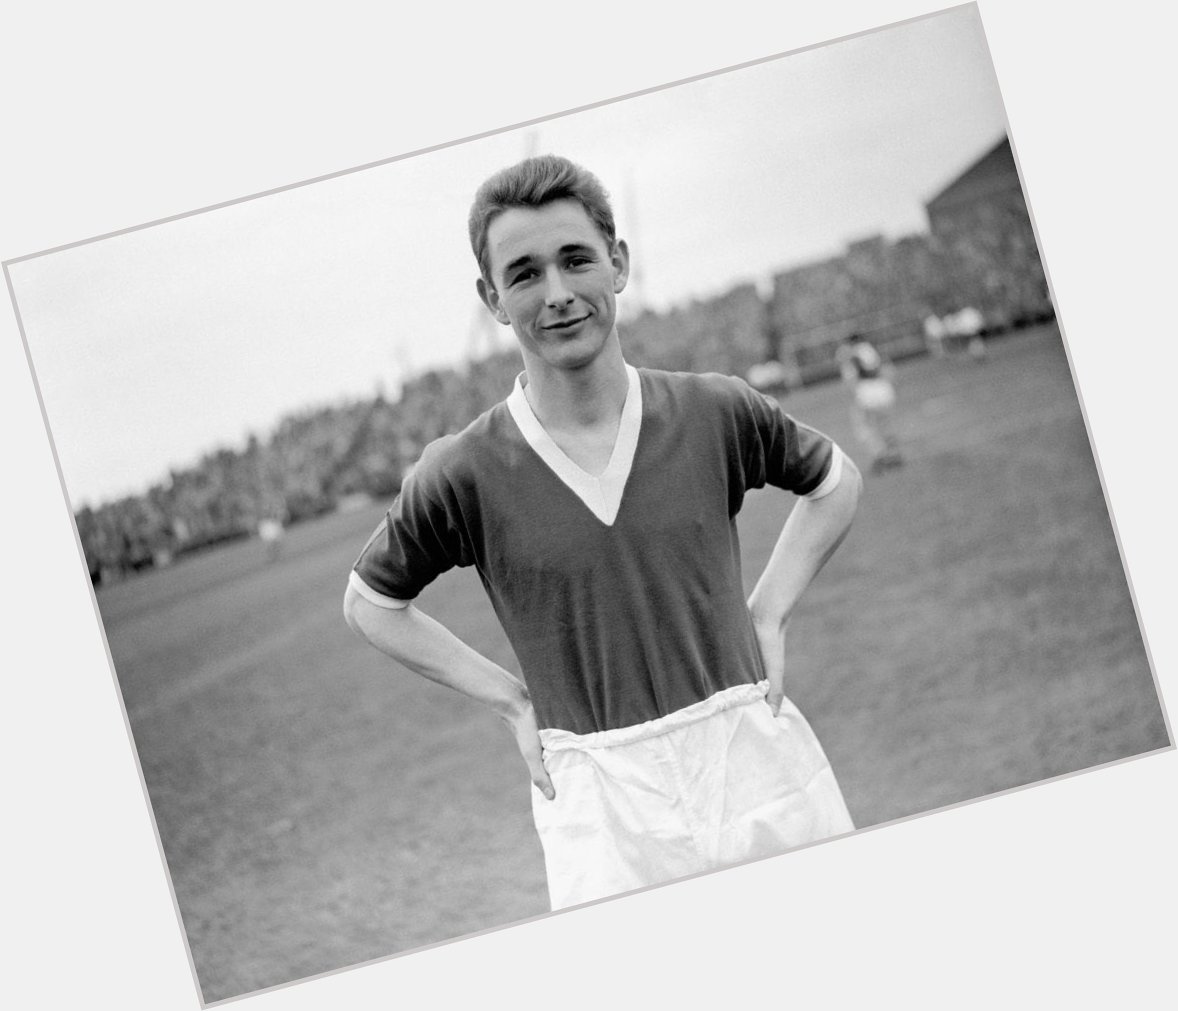 Happy birthday to Boro legend Brian Clough who would\ve been 82 today. 

204 goals in 222 games. 